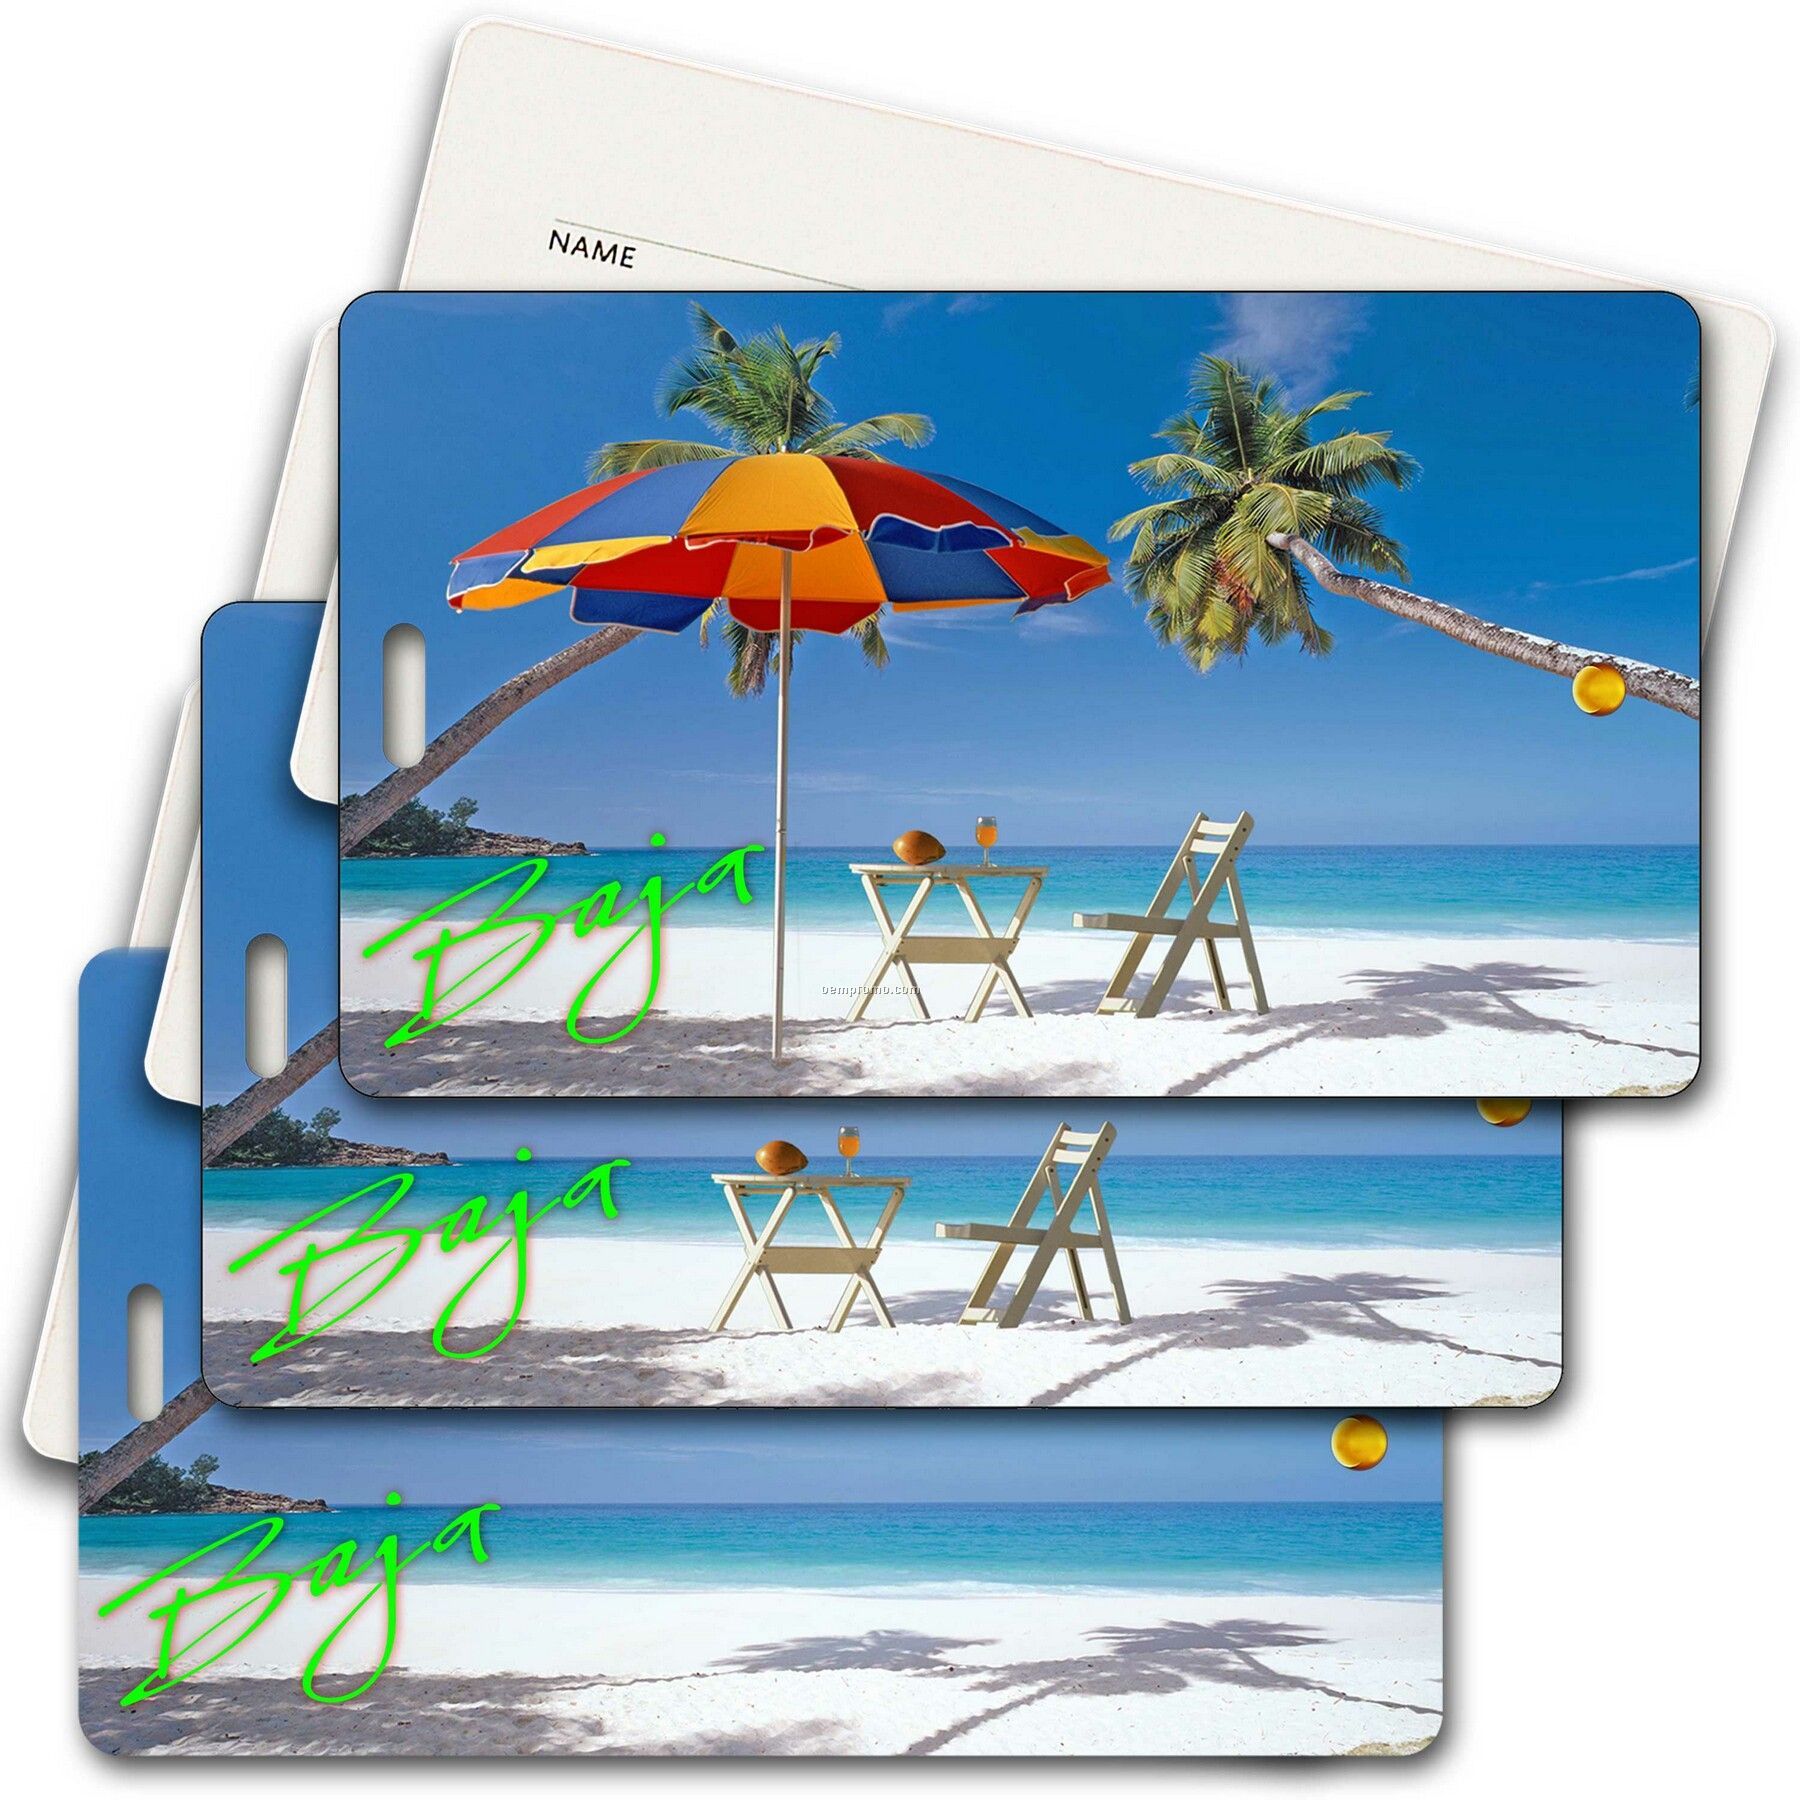 Privacy Tag W/3d Lenticular Images Of A Beach W/Umbrella (Imprinted)